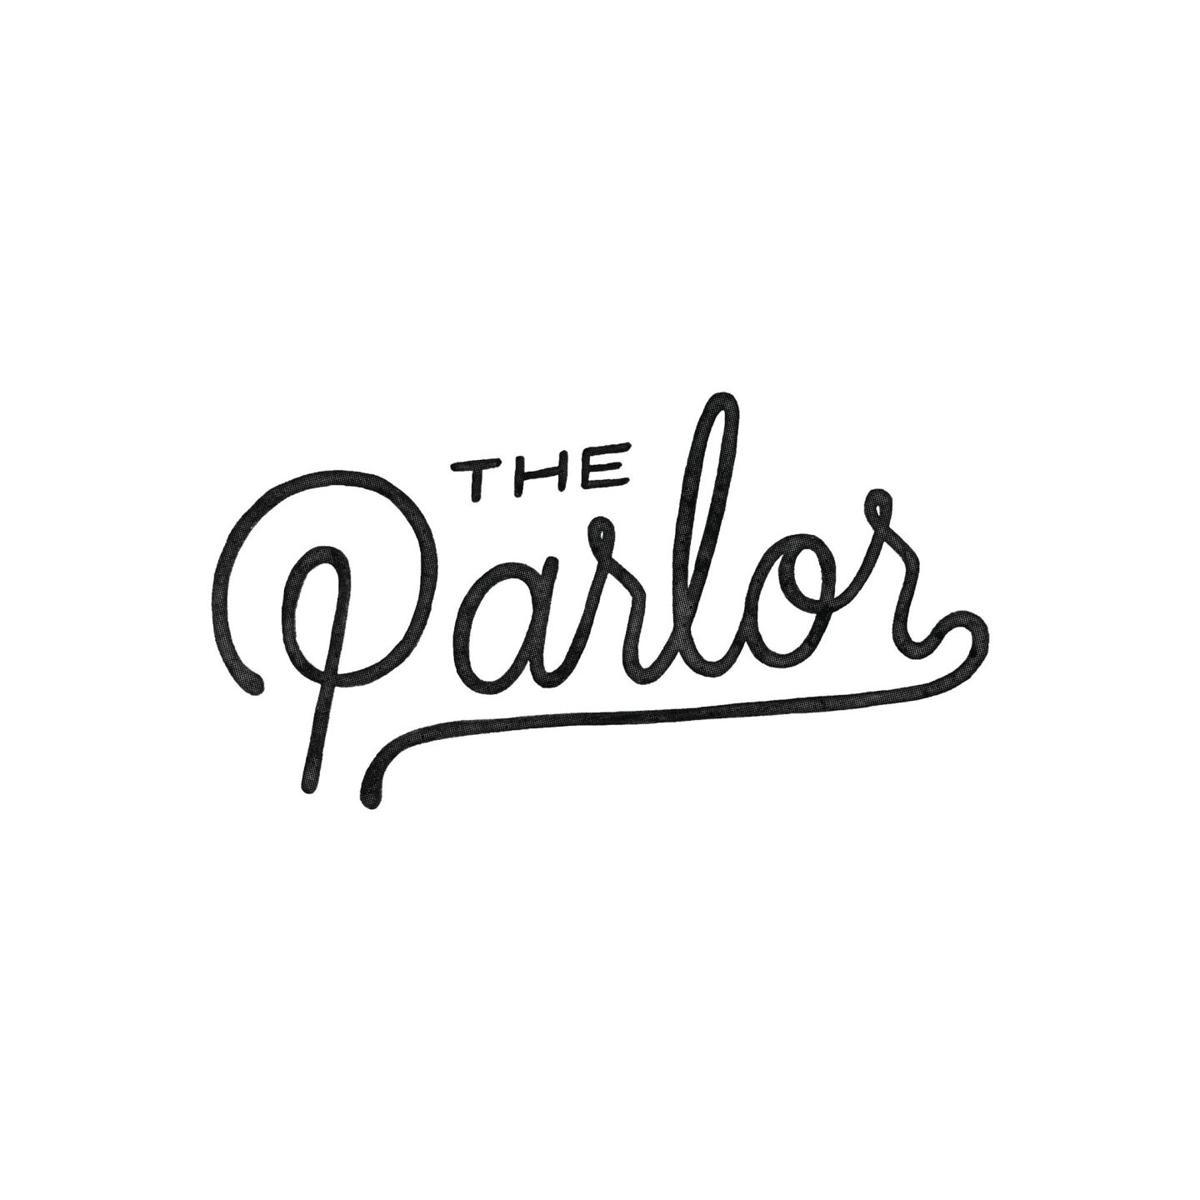 Local band showcase venue The Parlor to stop hosting concerts, move ...